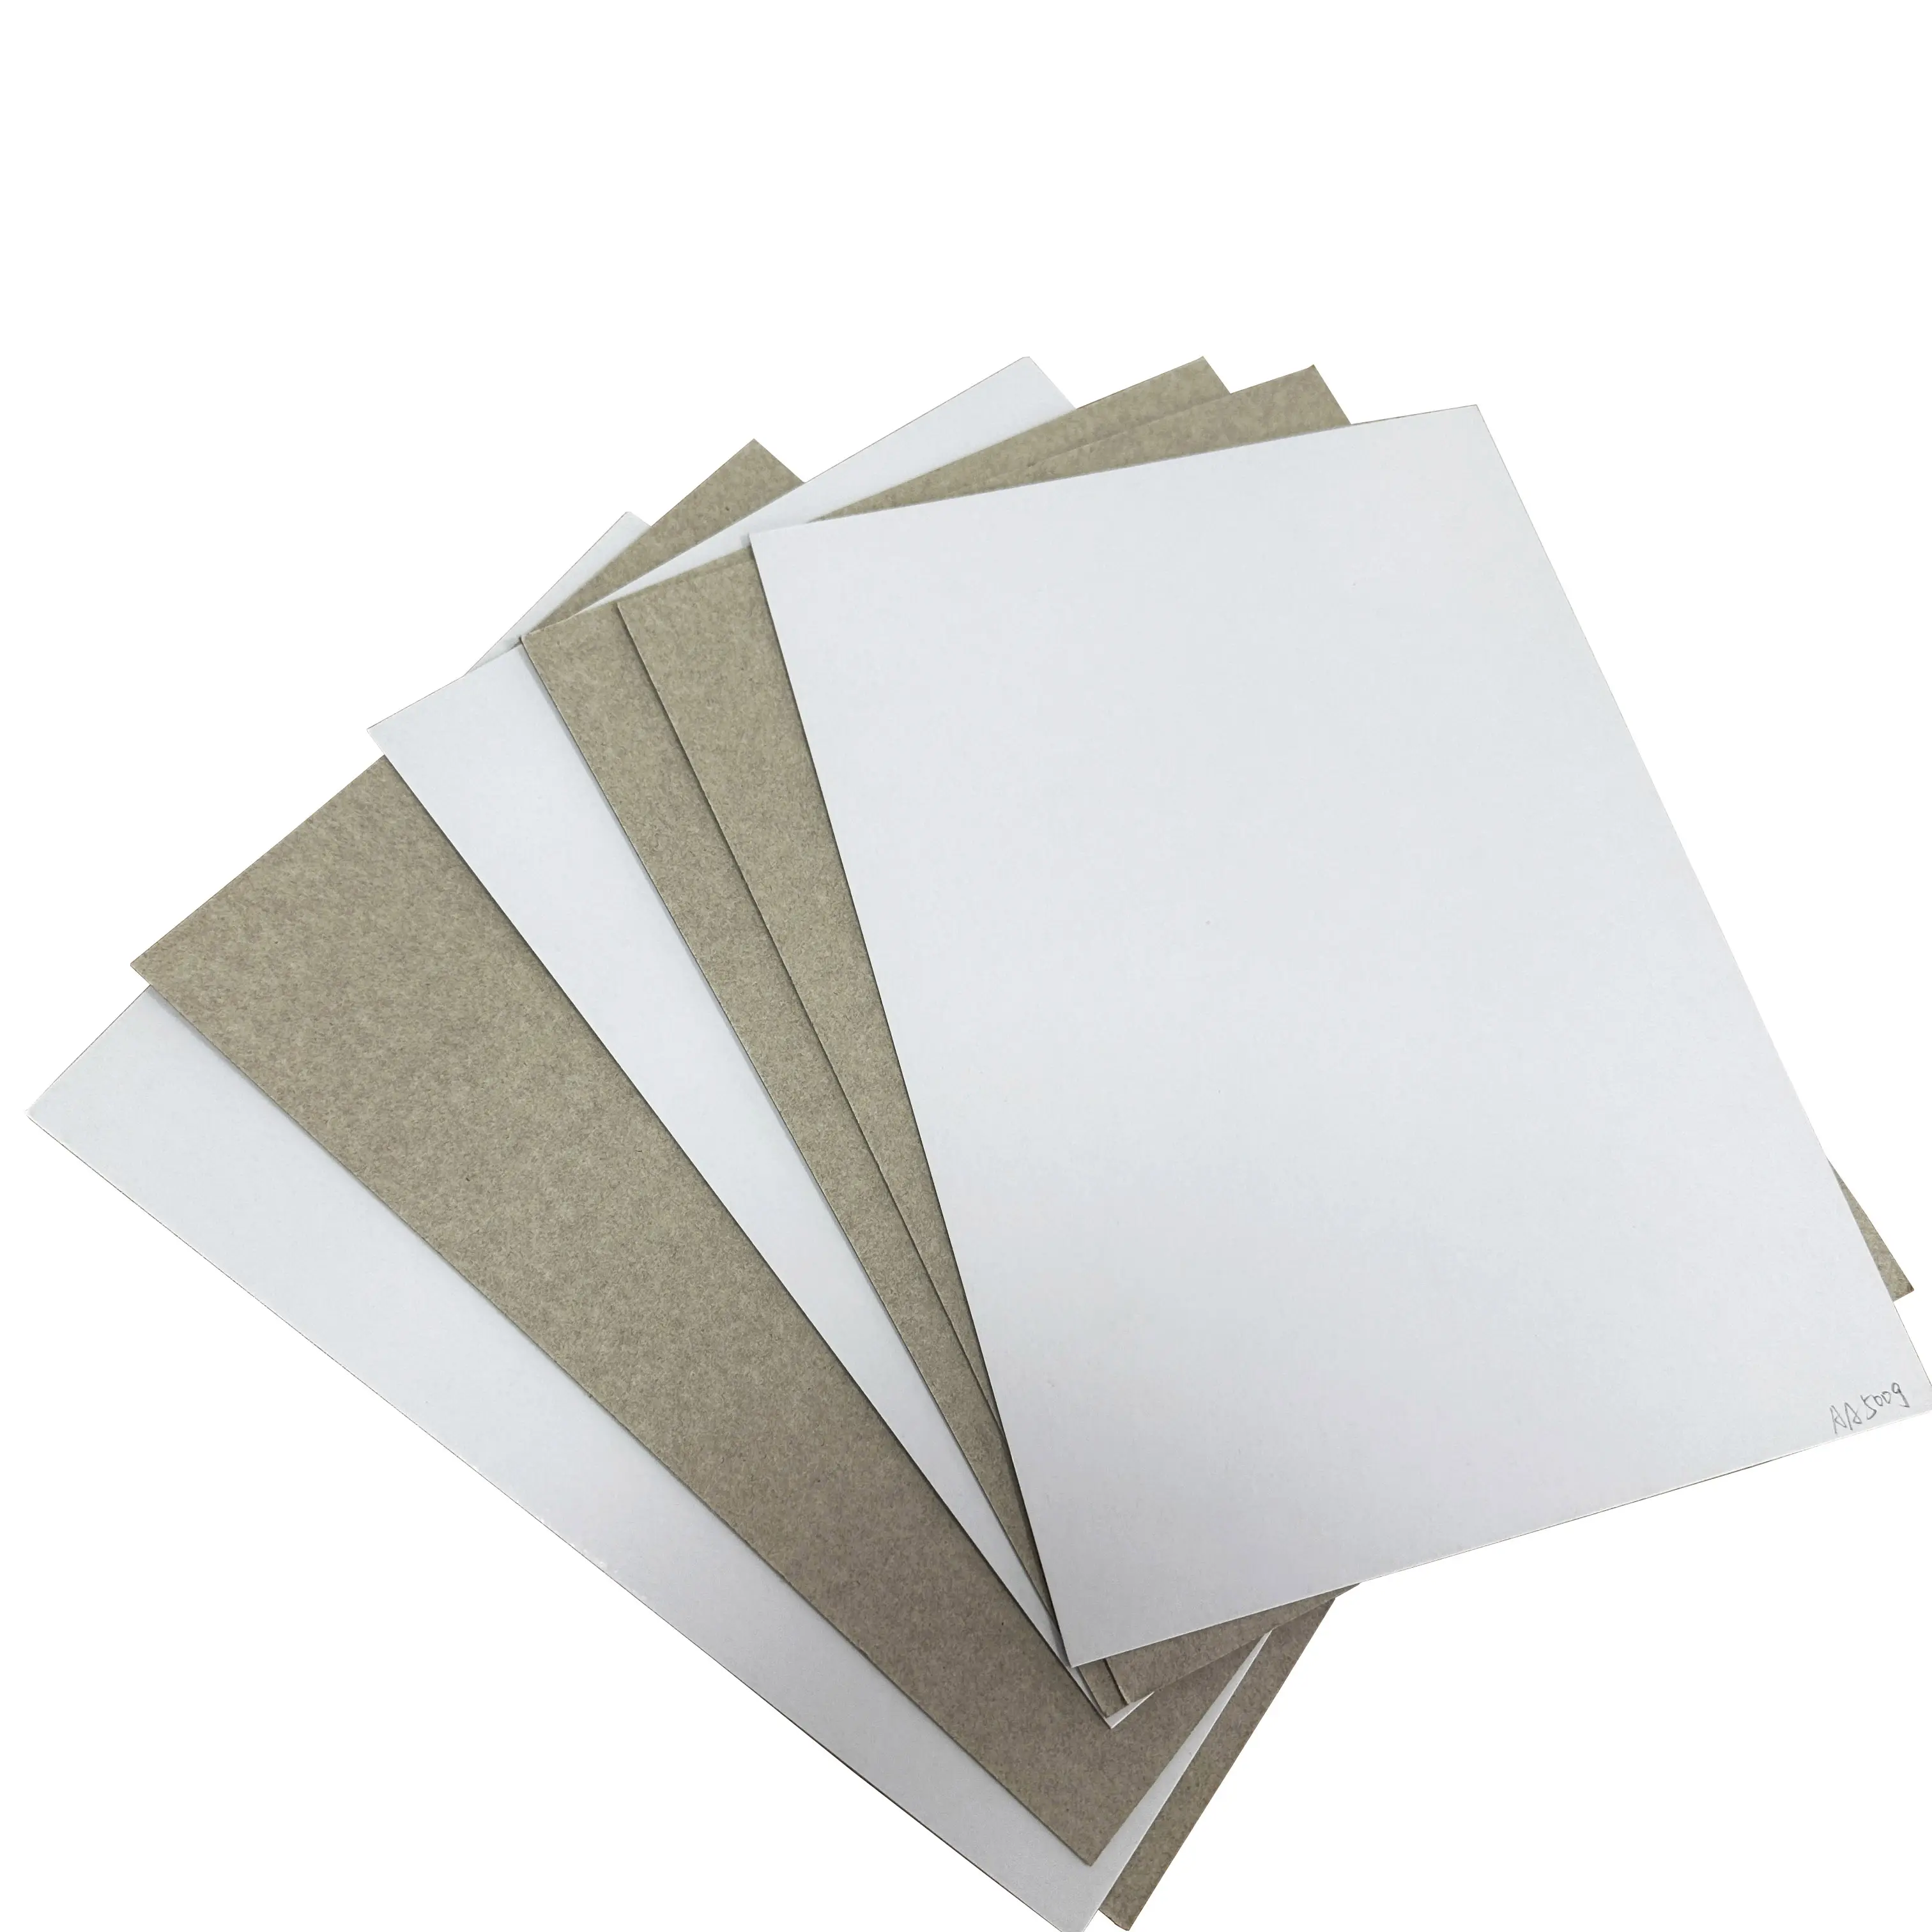 0.3mm-0.6mm Duplex Board Paper Clay Coated White Grey Back Single Side Coating Compatible with Offset Printing